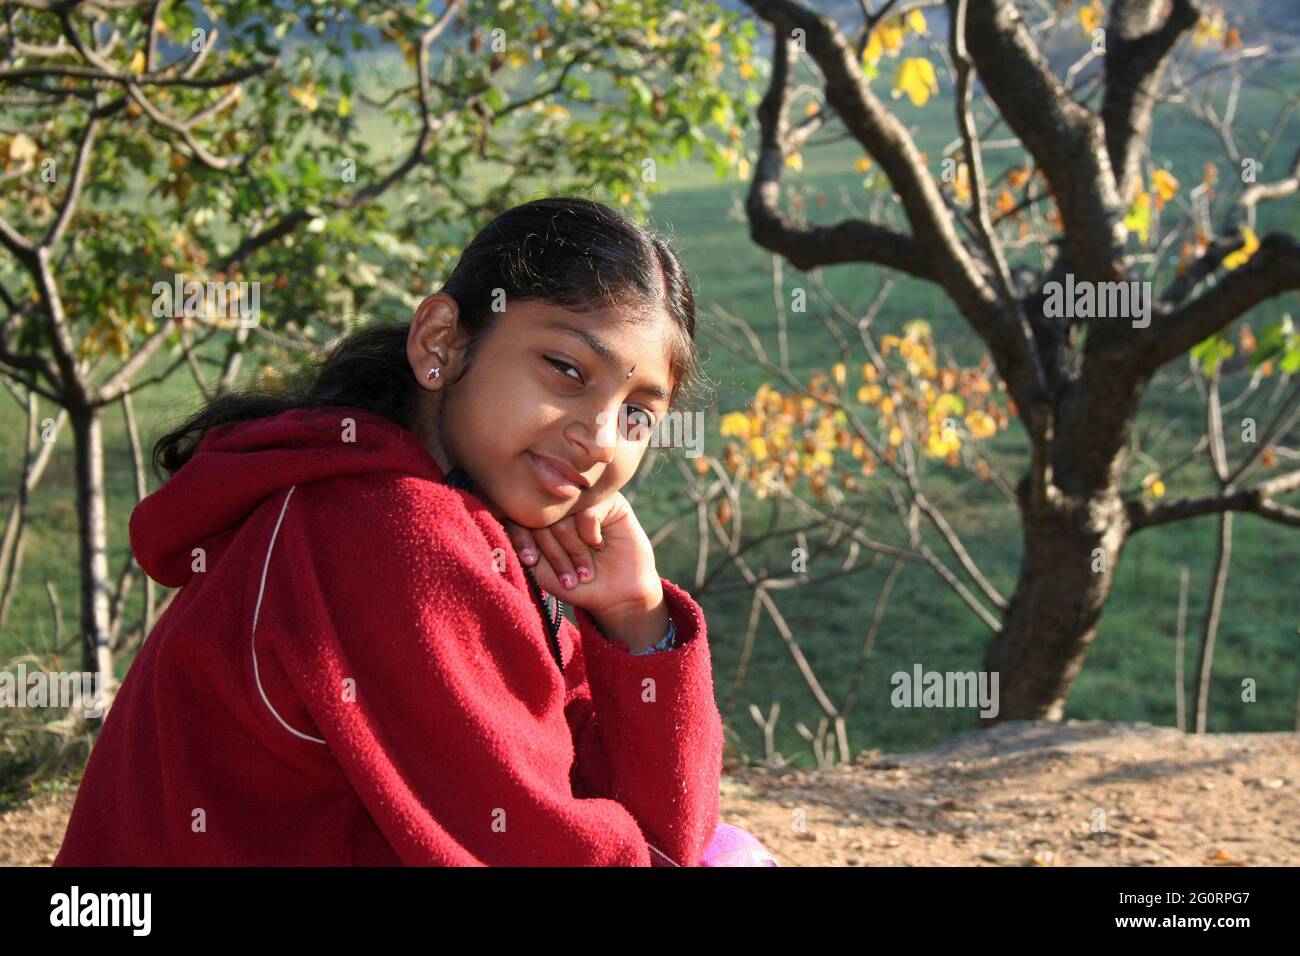 BENGALURU, INDIA - Jan 21, 2008: Indian girl in red sweater sitting in a park Stock Photo